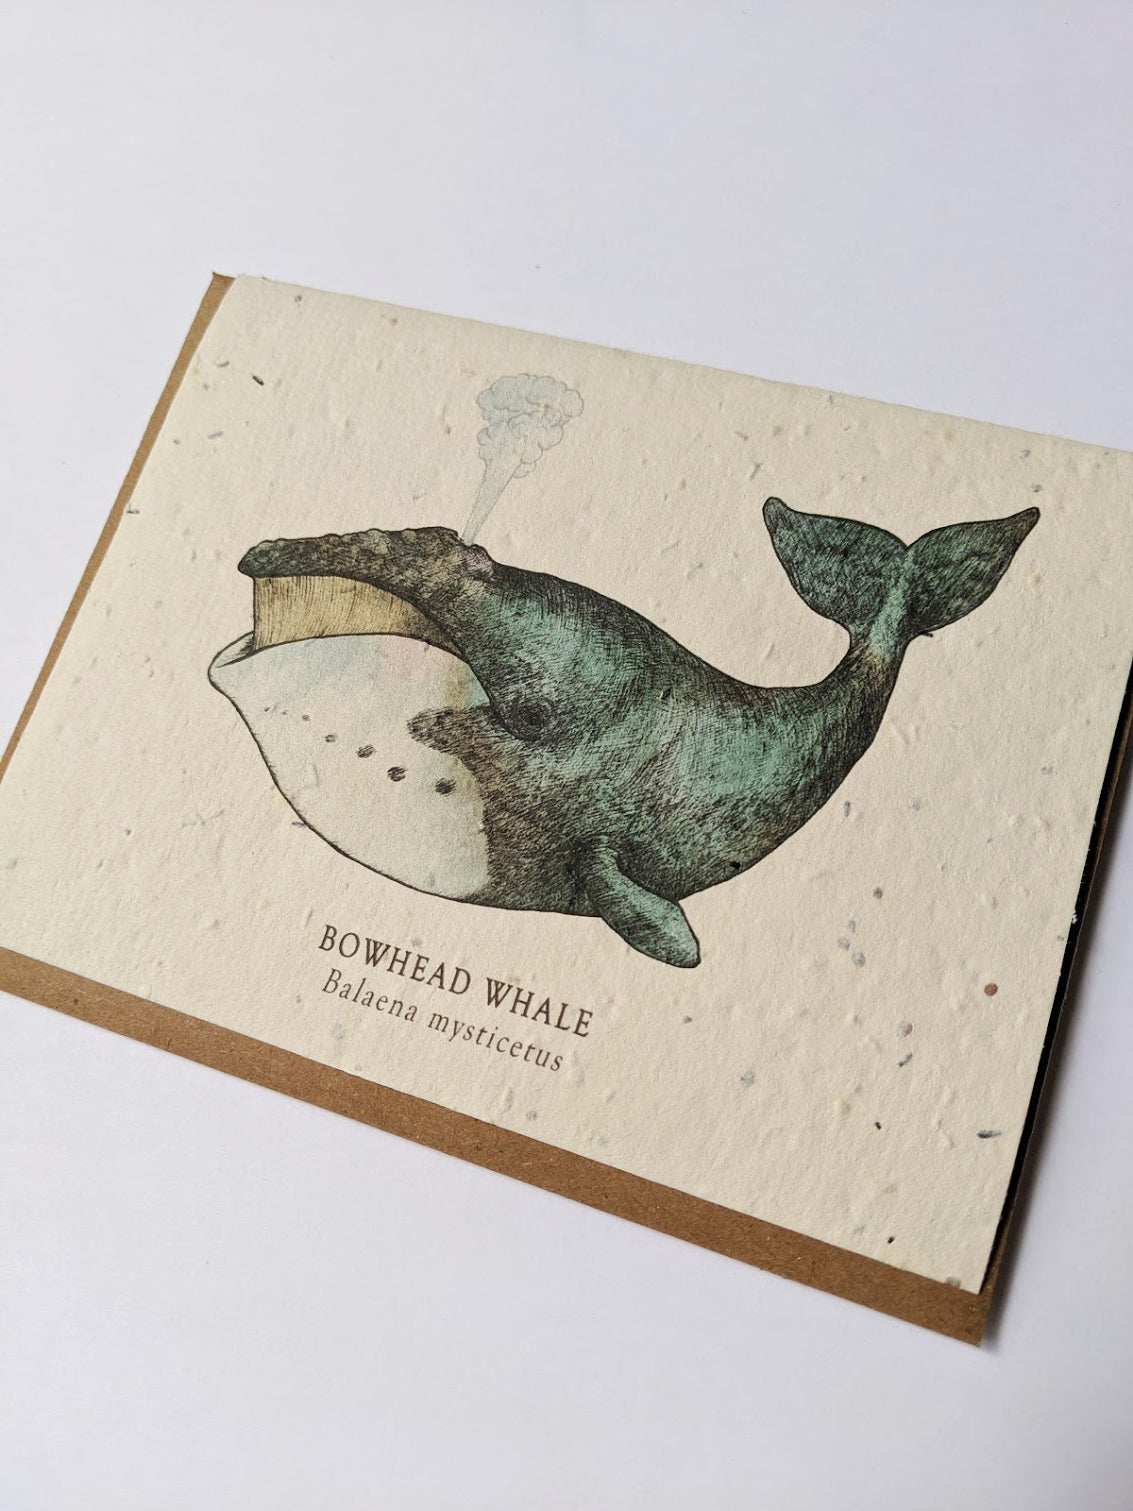 a plantable seed card - the card has a textured look from the seeds imbedded in the paper. There is a whale drawing on this one that says 